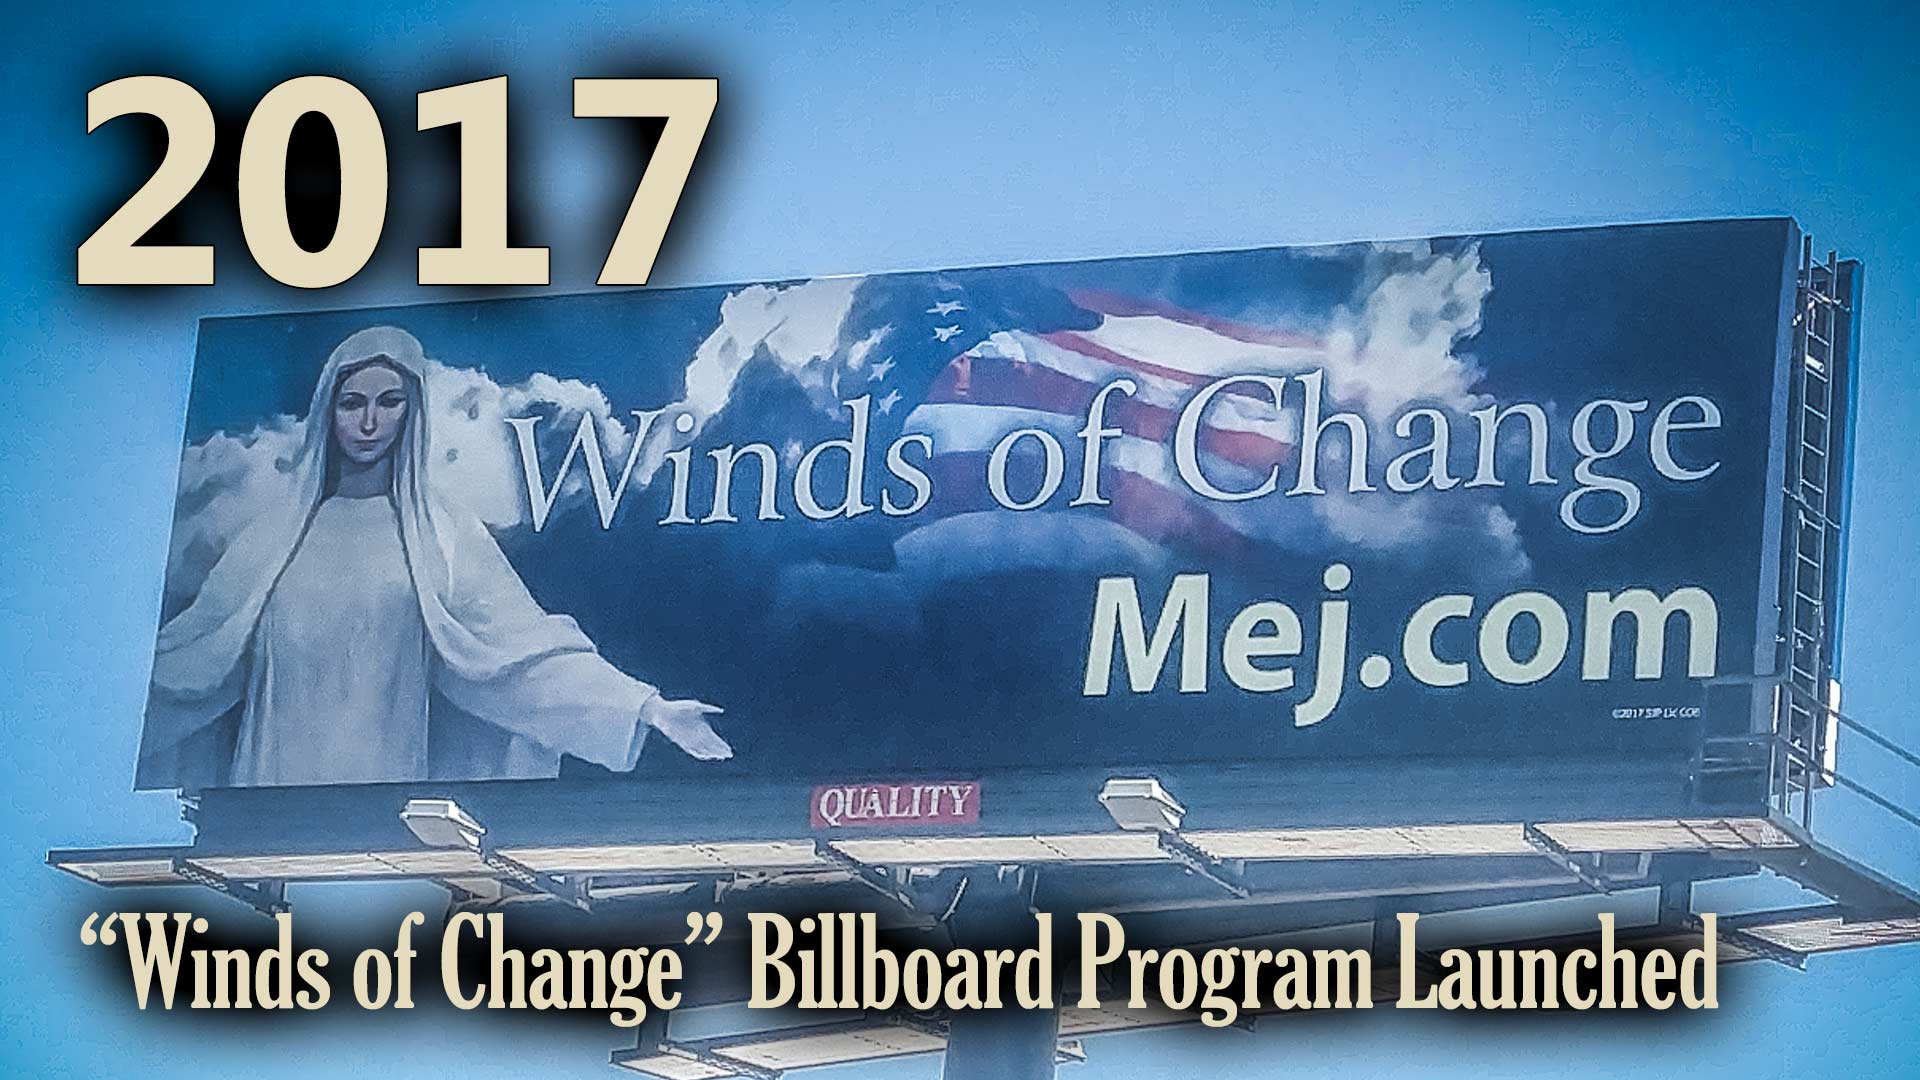 76-Winds-of-Change